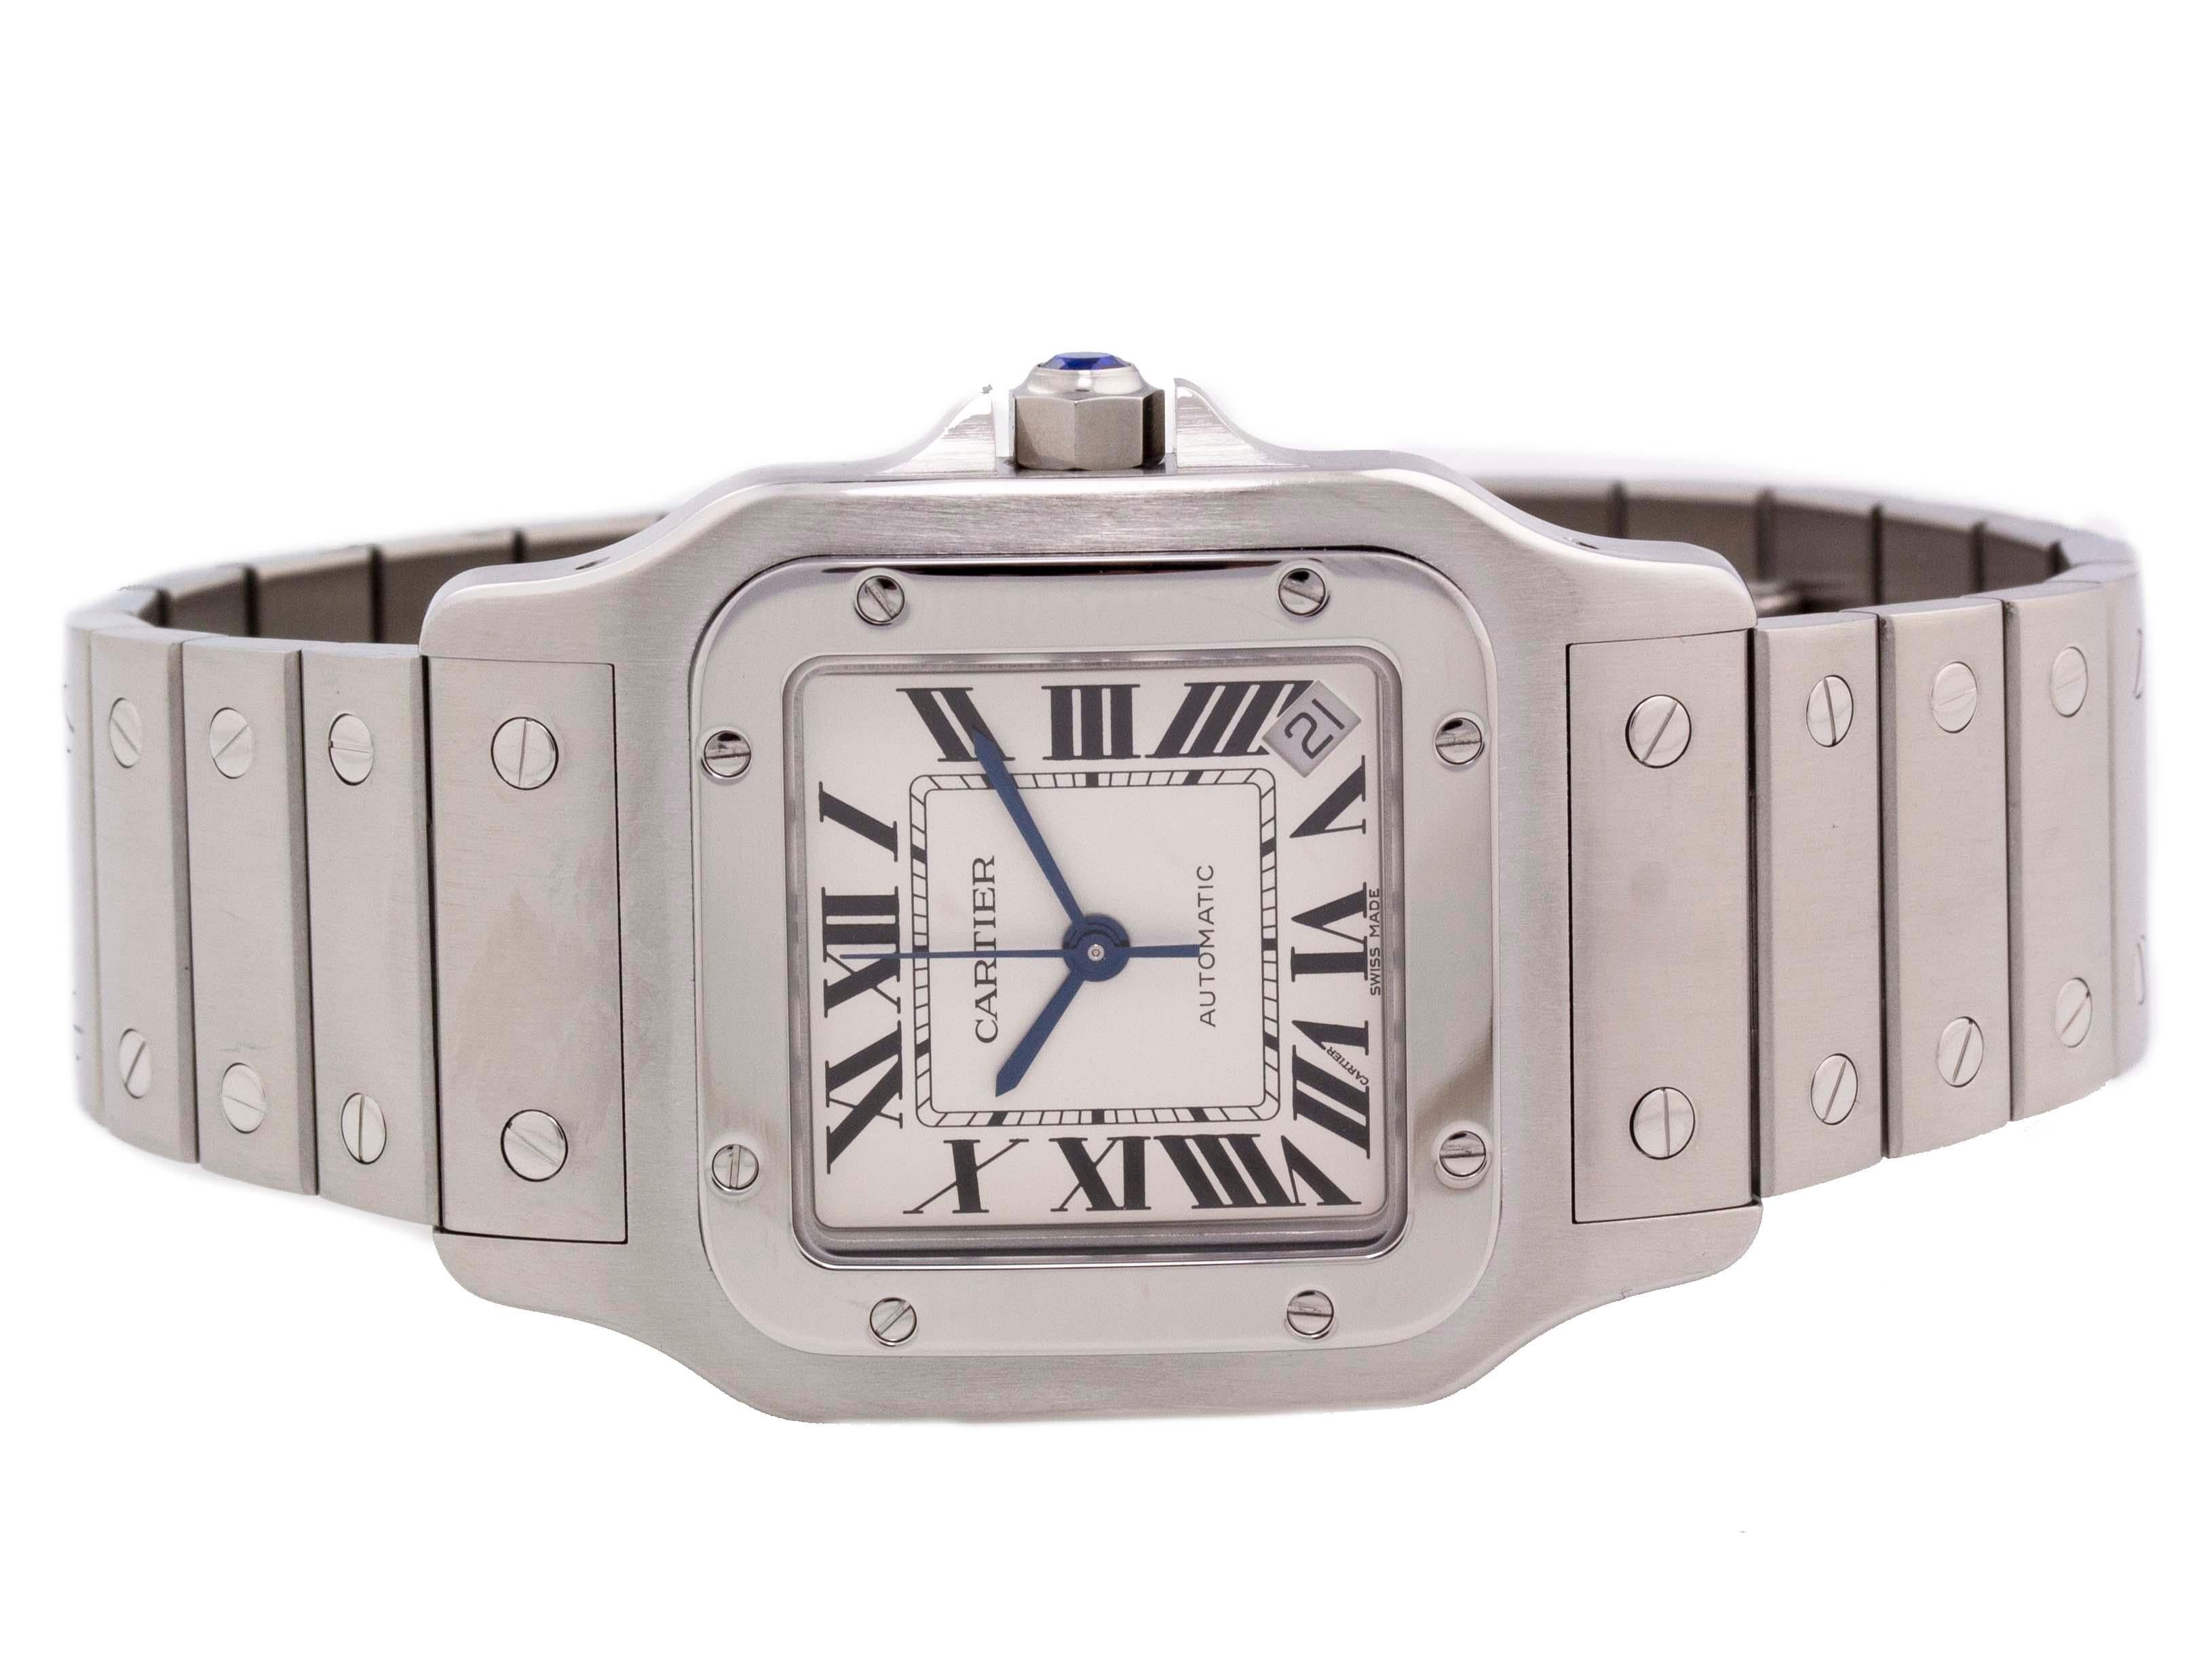 Brand	Cartier
Series	Santos
Model	2823
Gender	Men's
Condition	Excellent Condition Pre-owned
Material	Stainless Steel
Finish	Brushed & Polished
Caseback	Stainless Steel
Diameter	32mm
Thickness	9mm
Bezel	Fixed Steel Bezel
Crystal	Sapphire Scratch